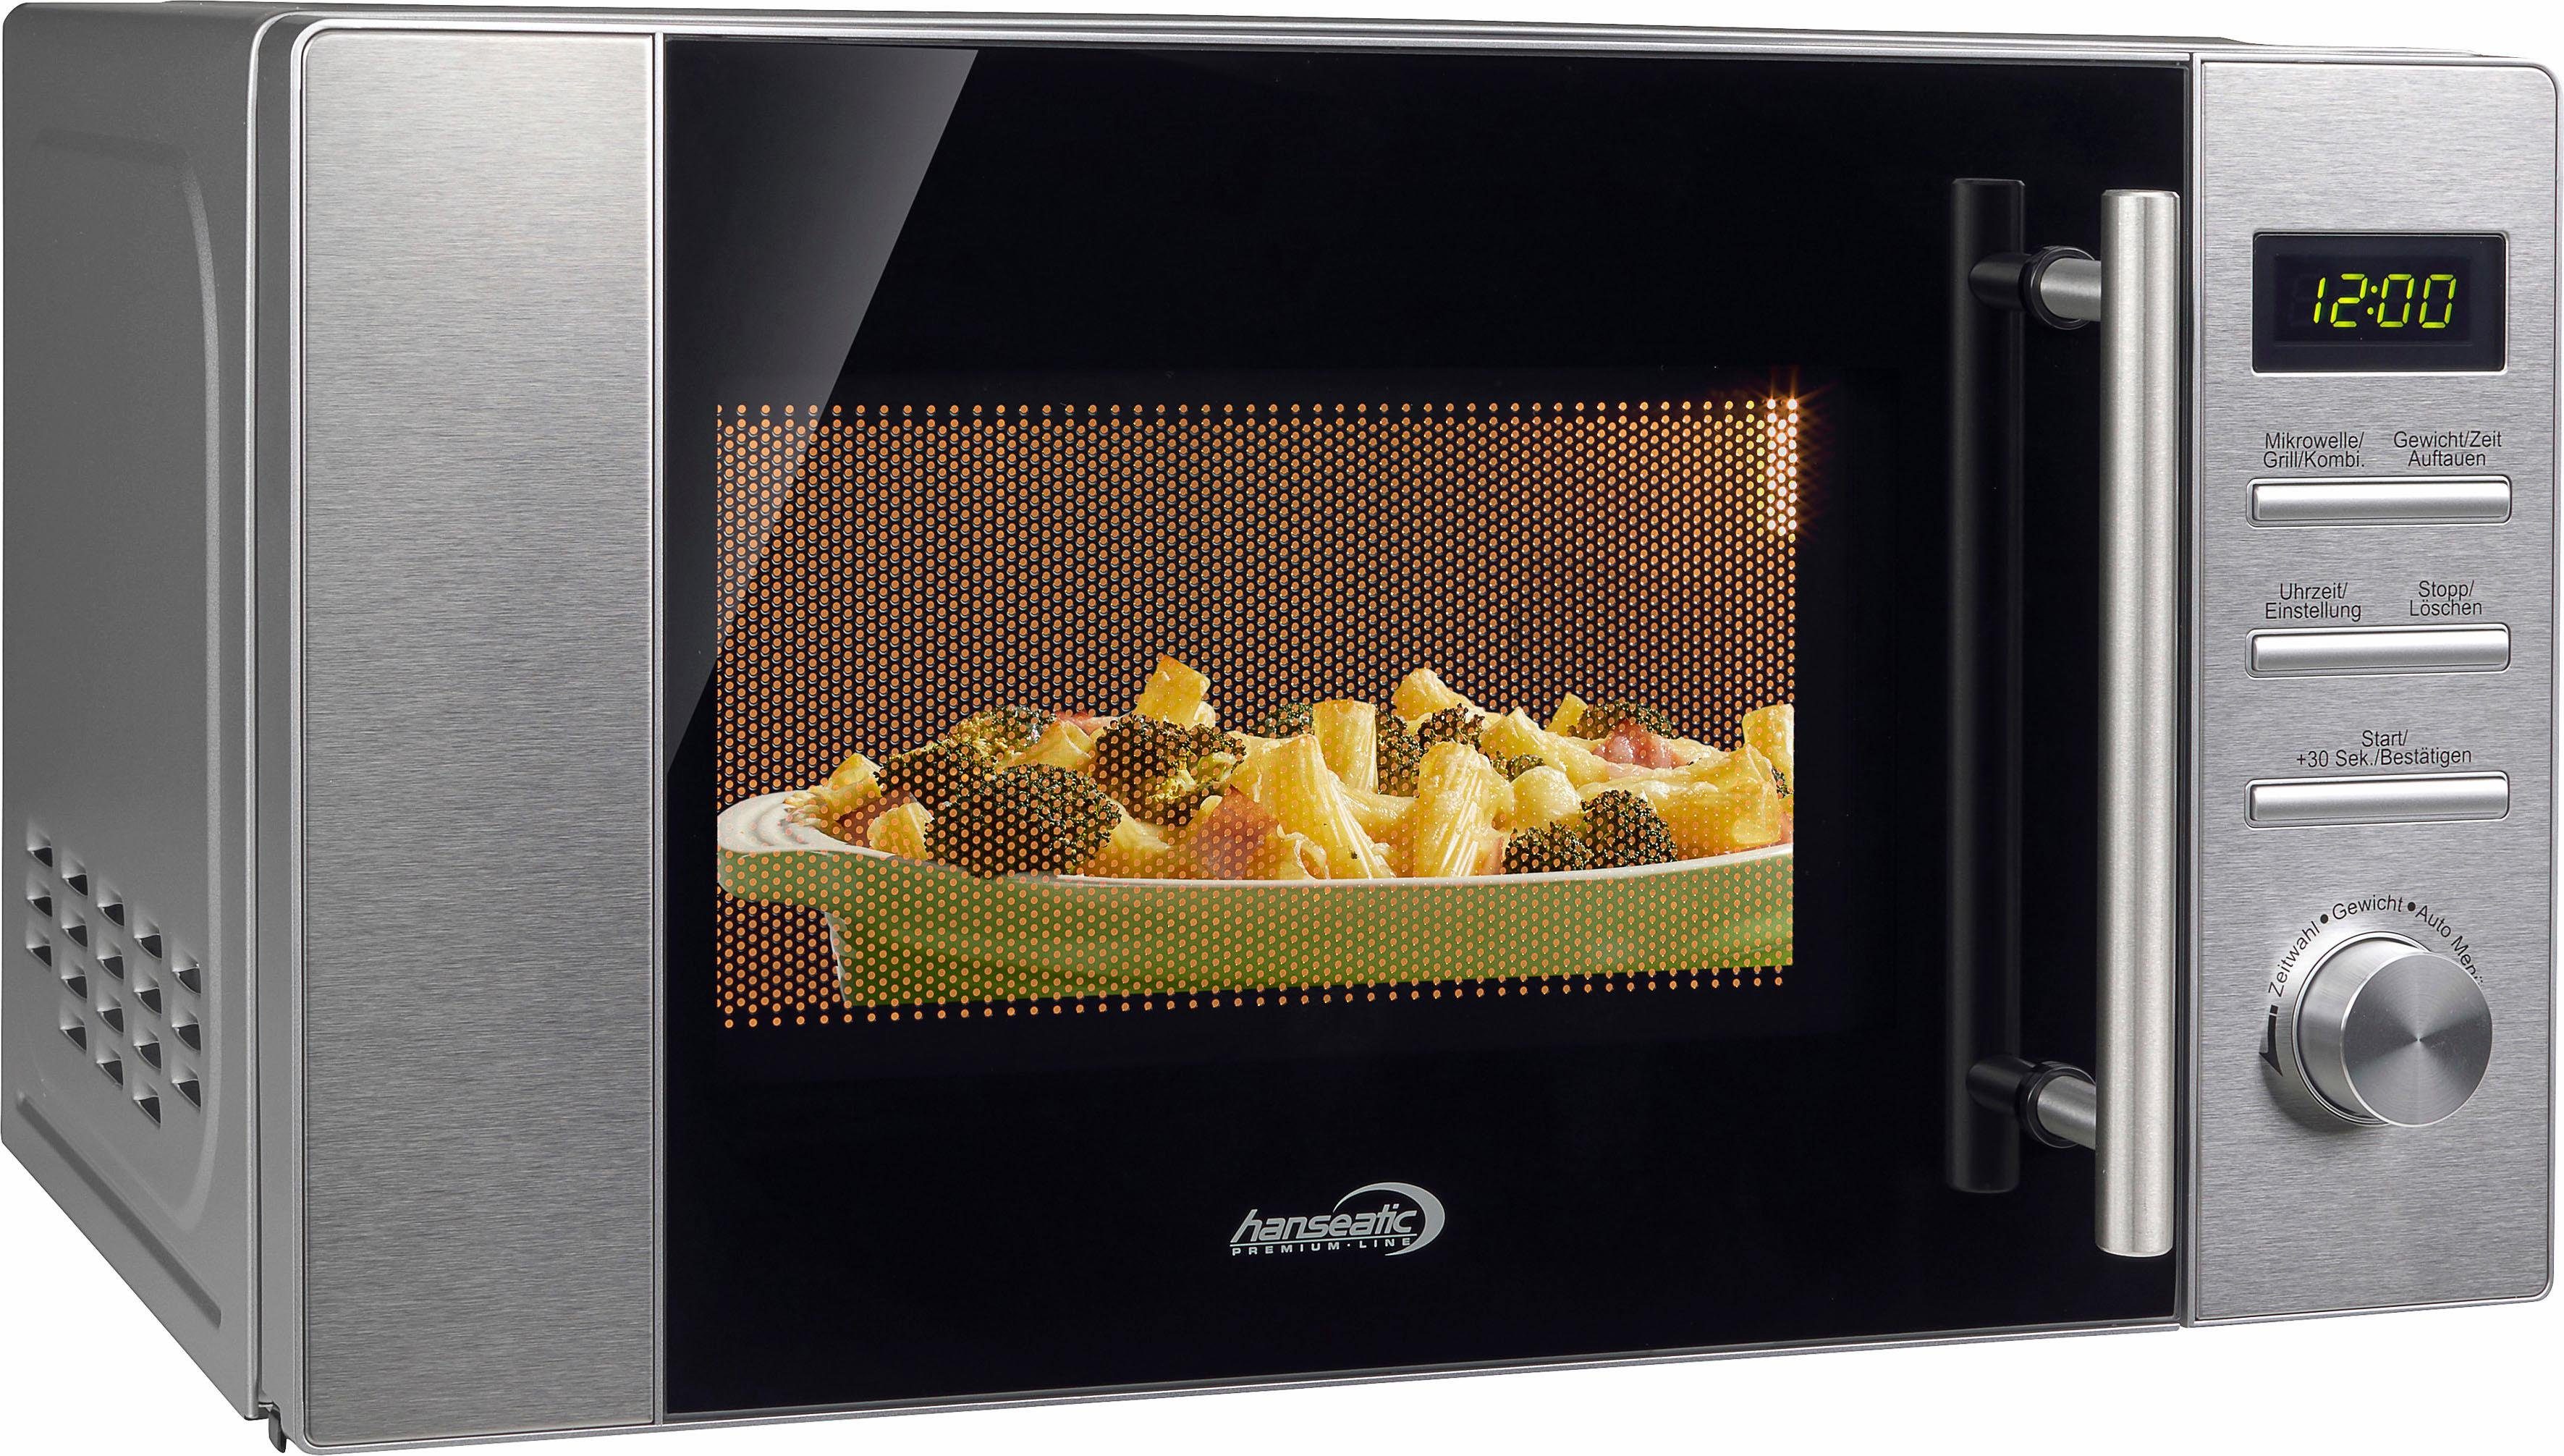 Hanseatic Mikrowelle 656920, l Grill, 20